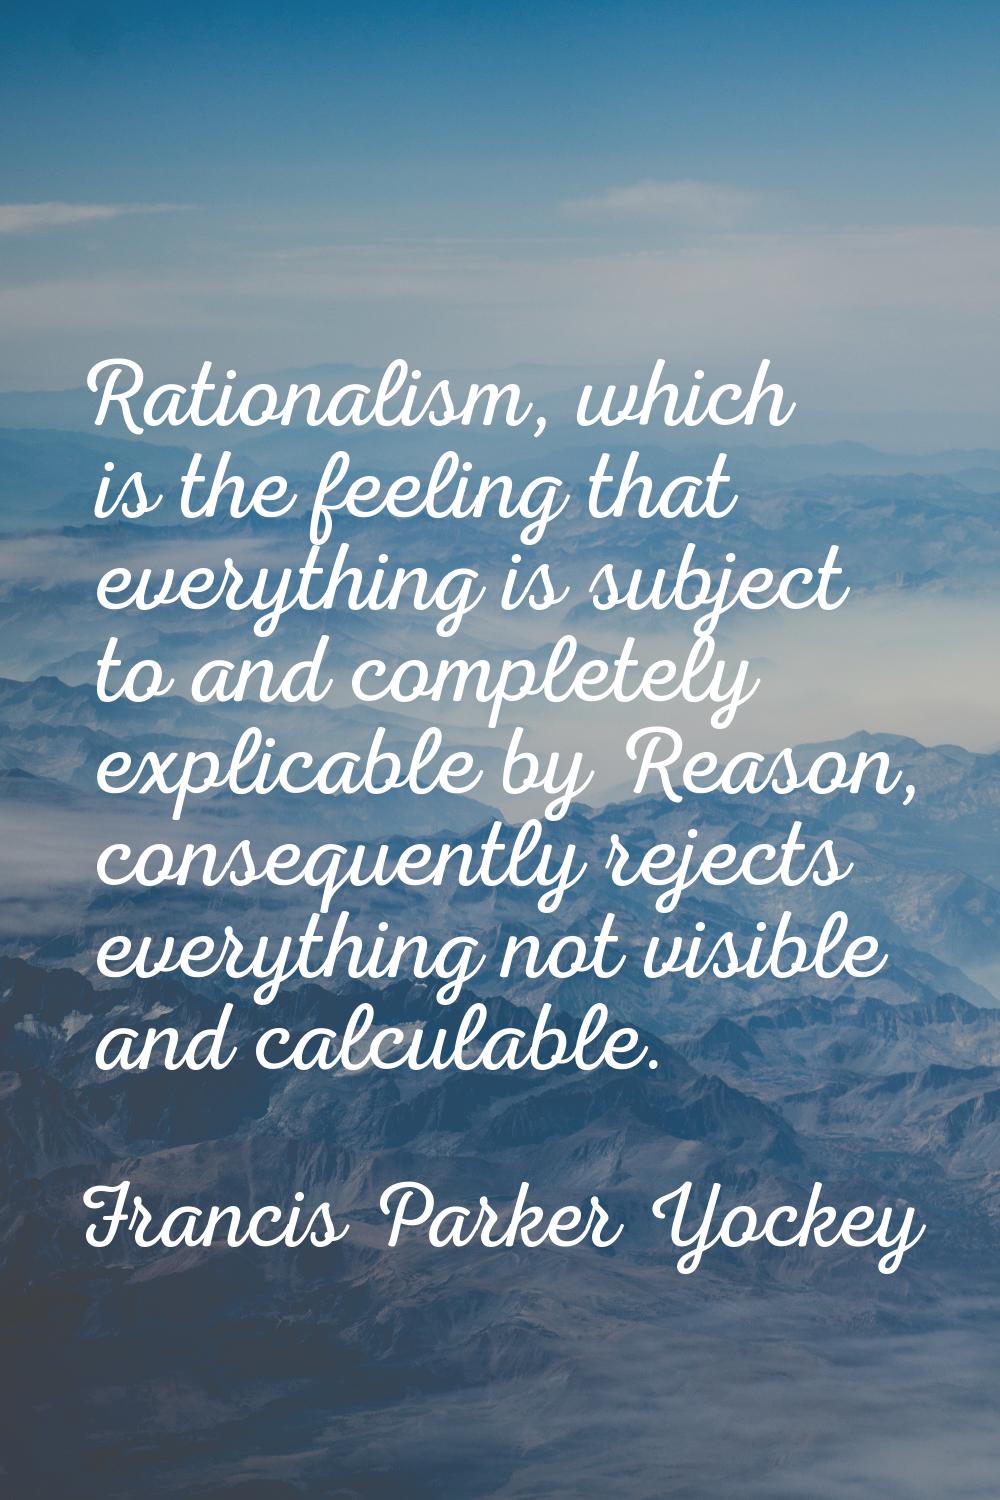 Rationalism, which is the feeling that everything is subject to and completely explicable by Reason